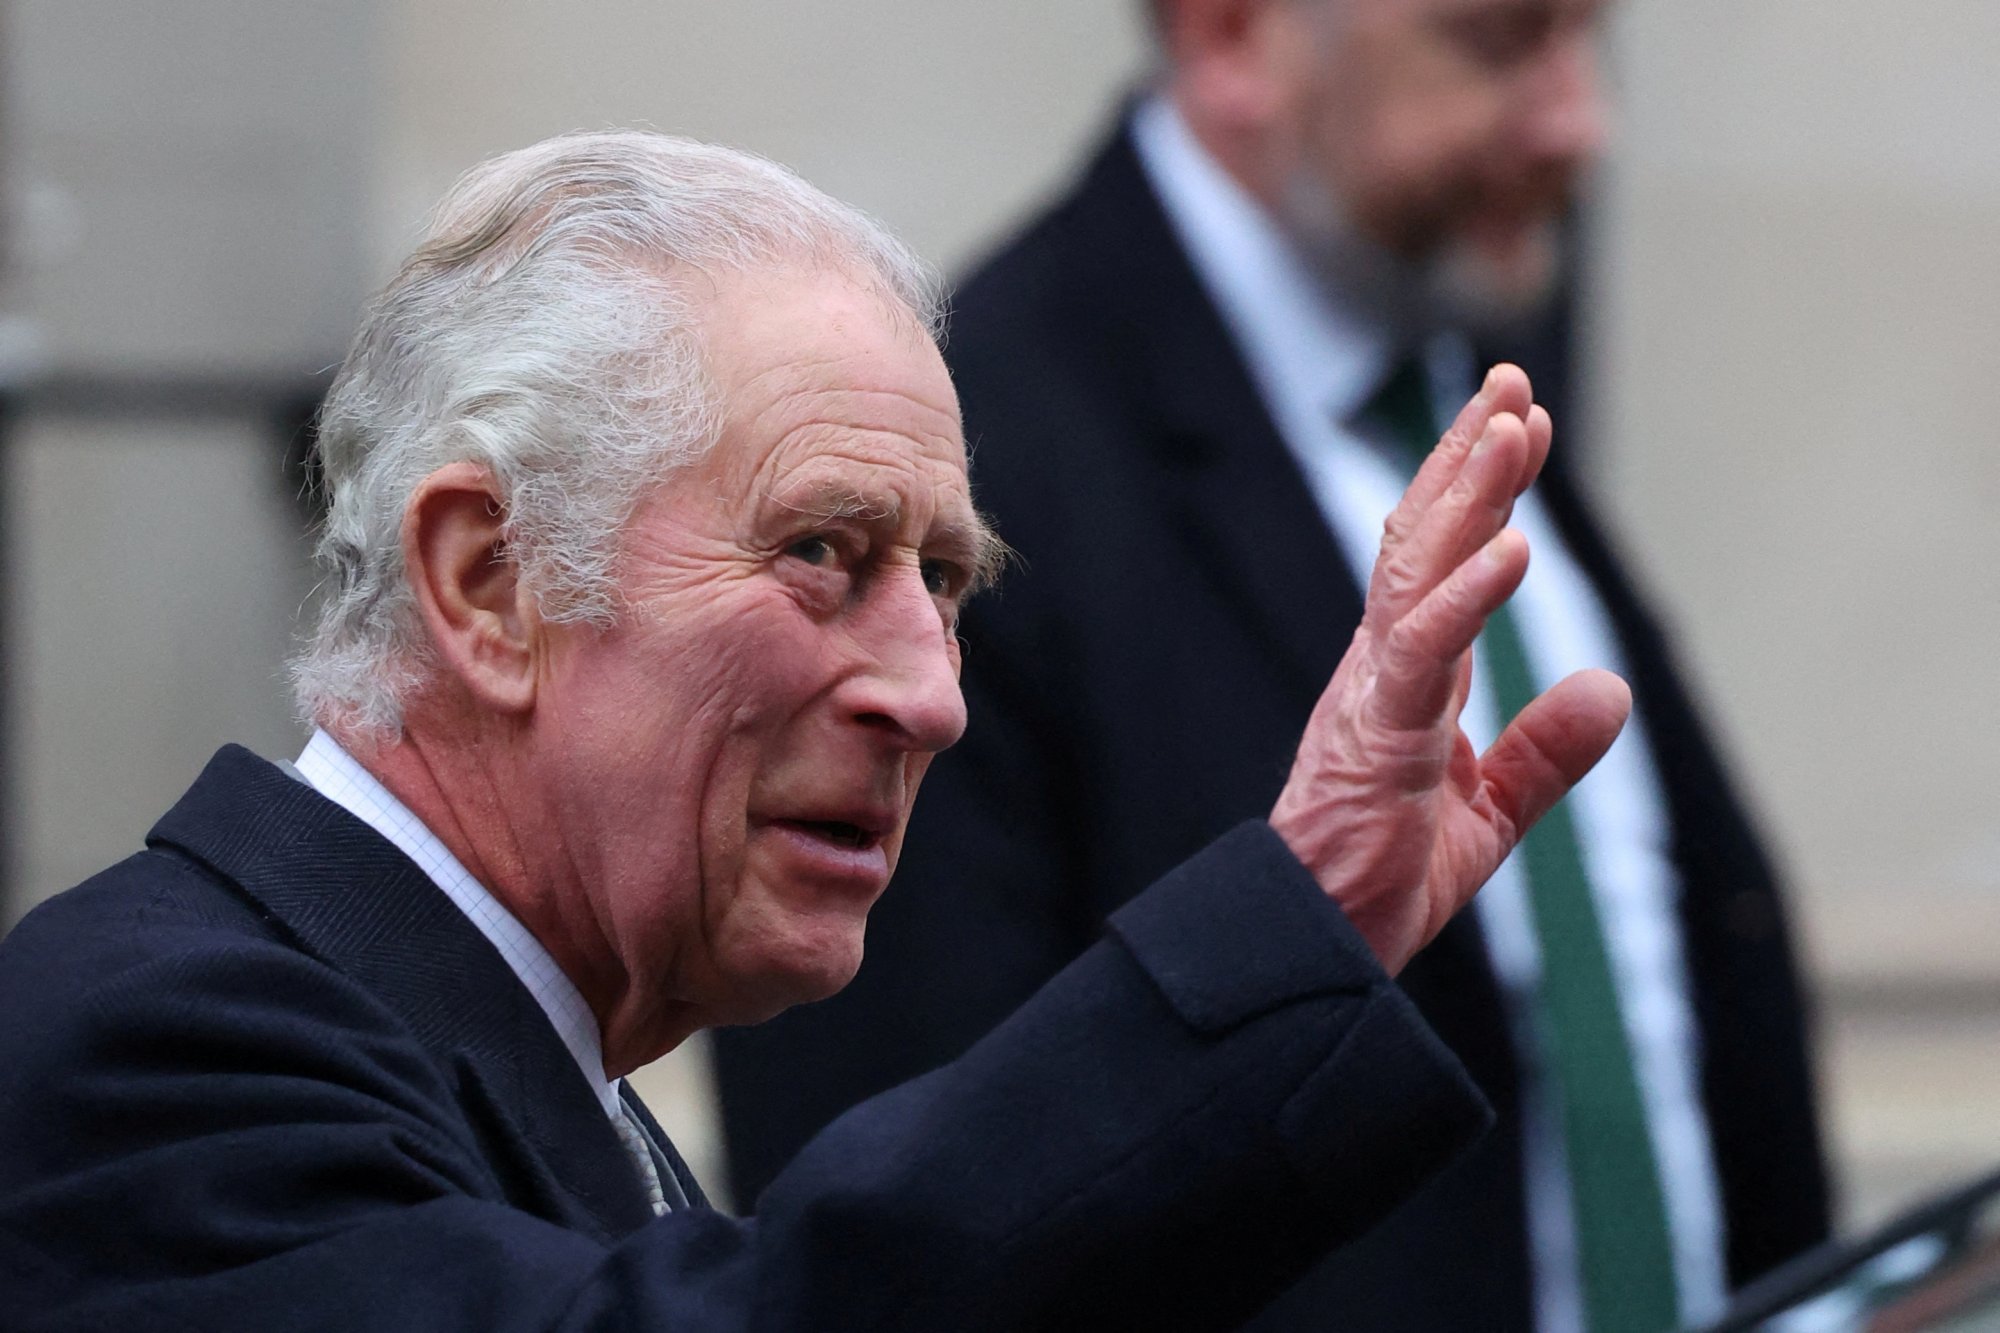 Shock in Britain: King Charles was diagnosed with cancer